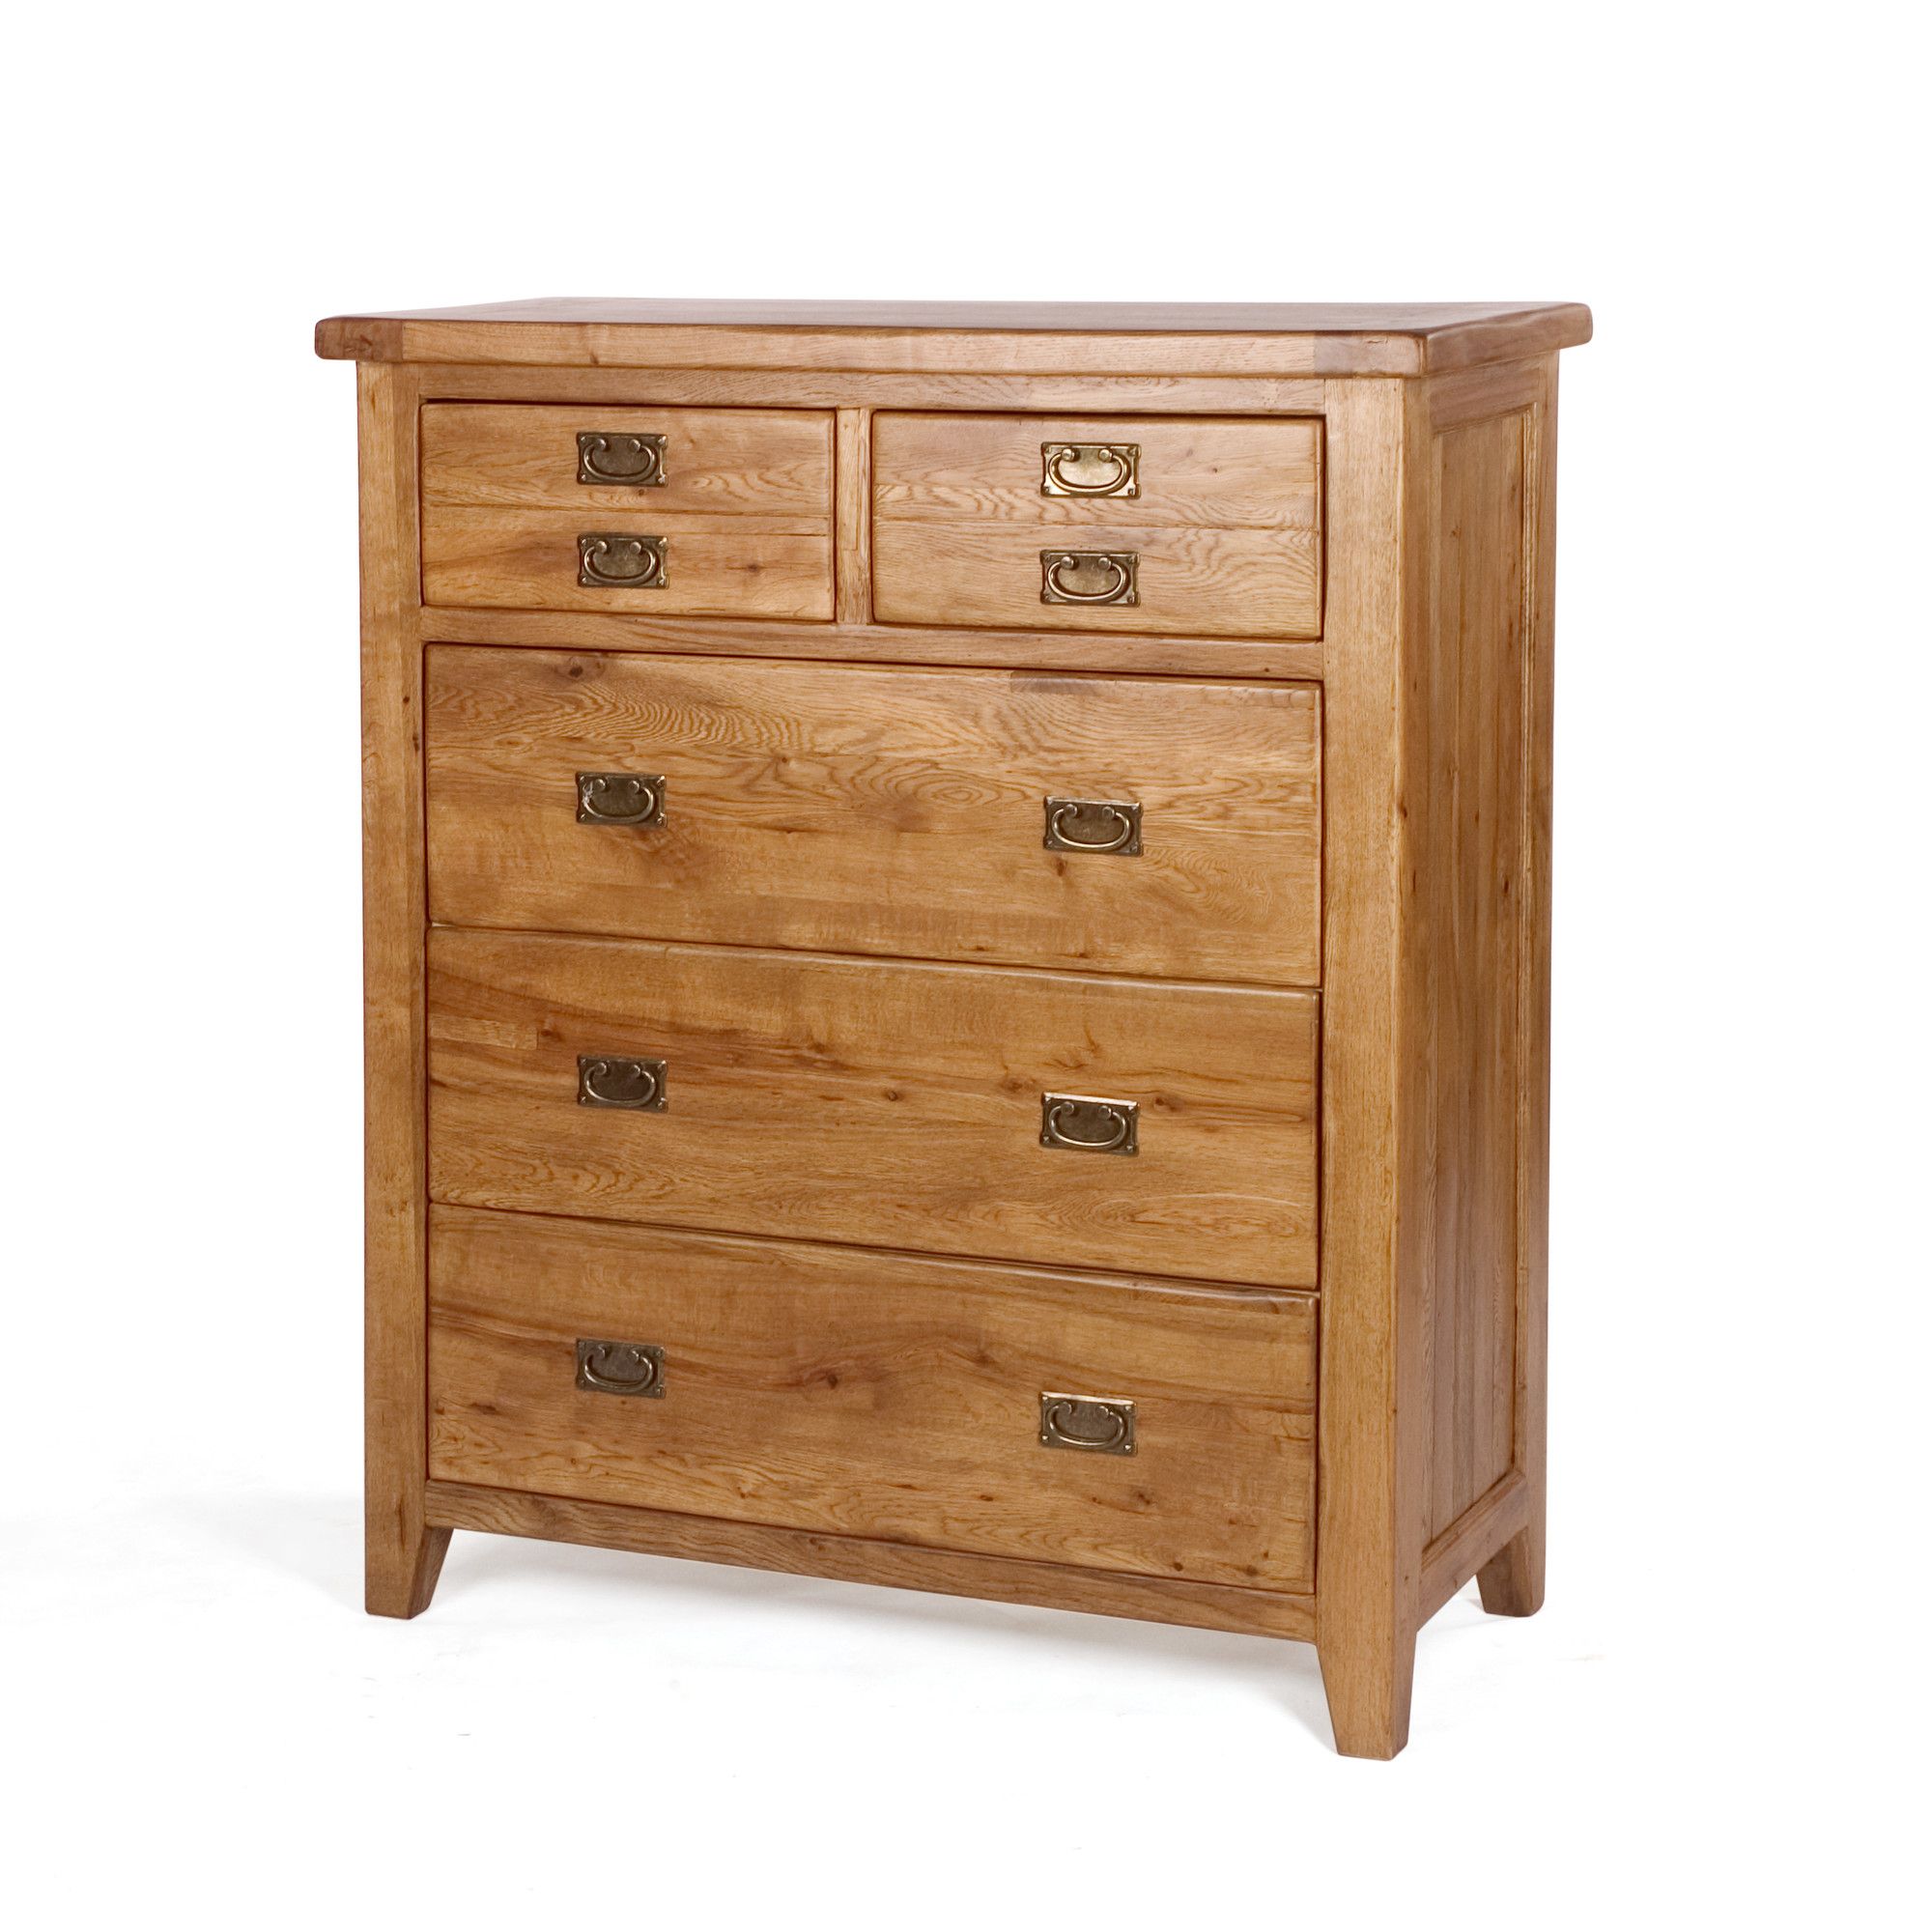 Wiseaction Florence 5 Drawer Chest at Tesco Direct